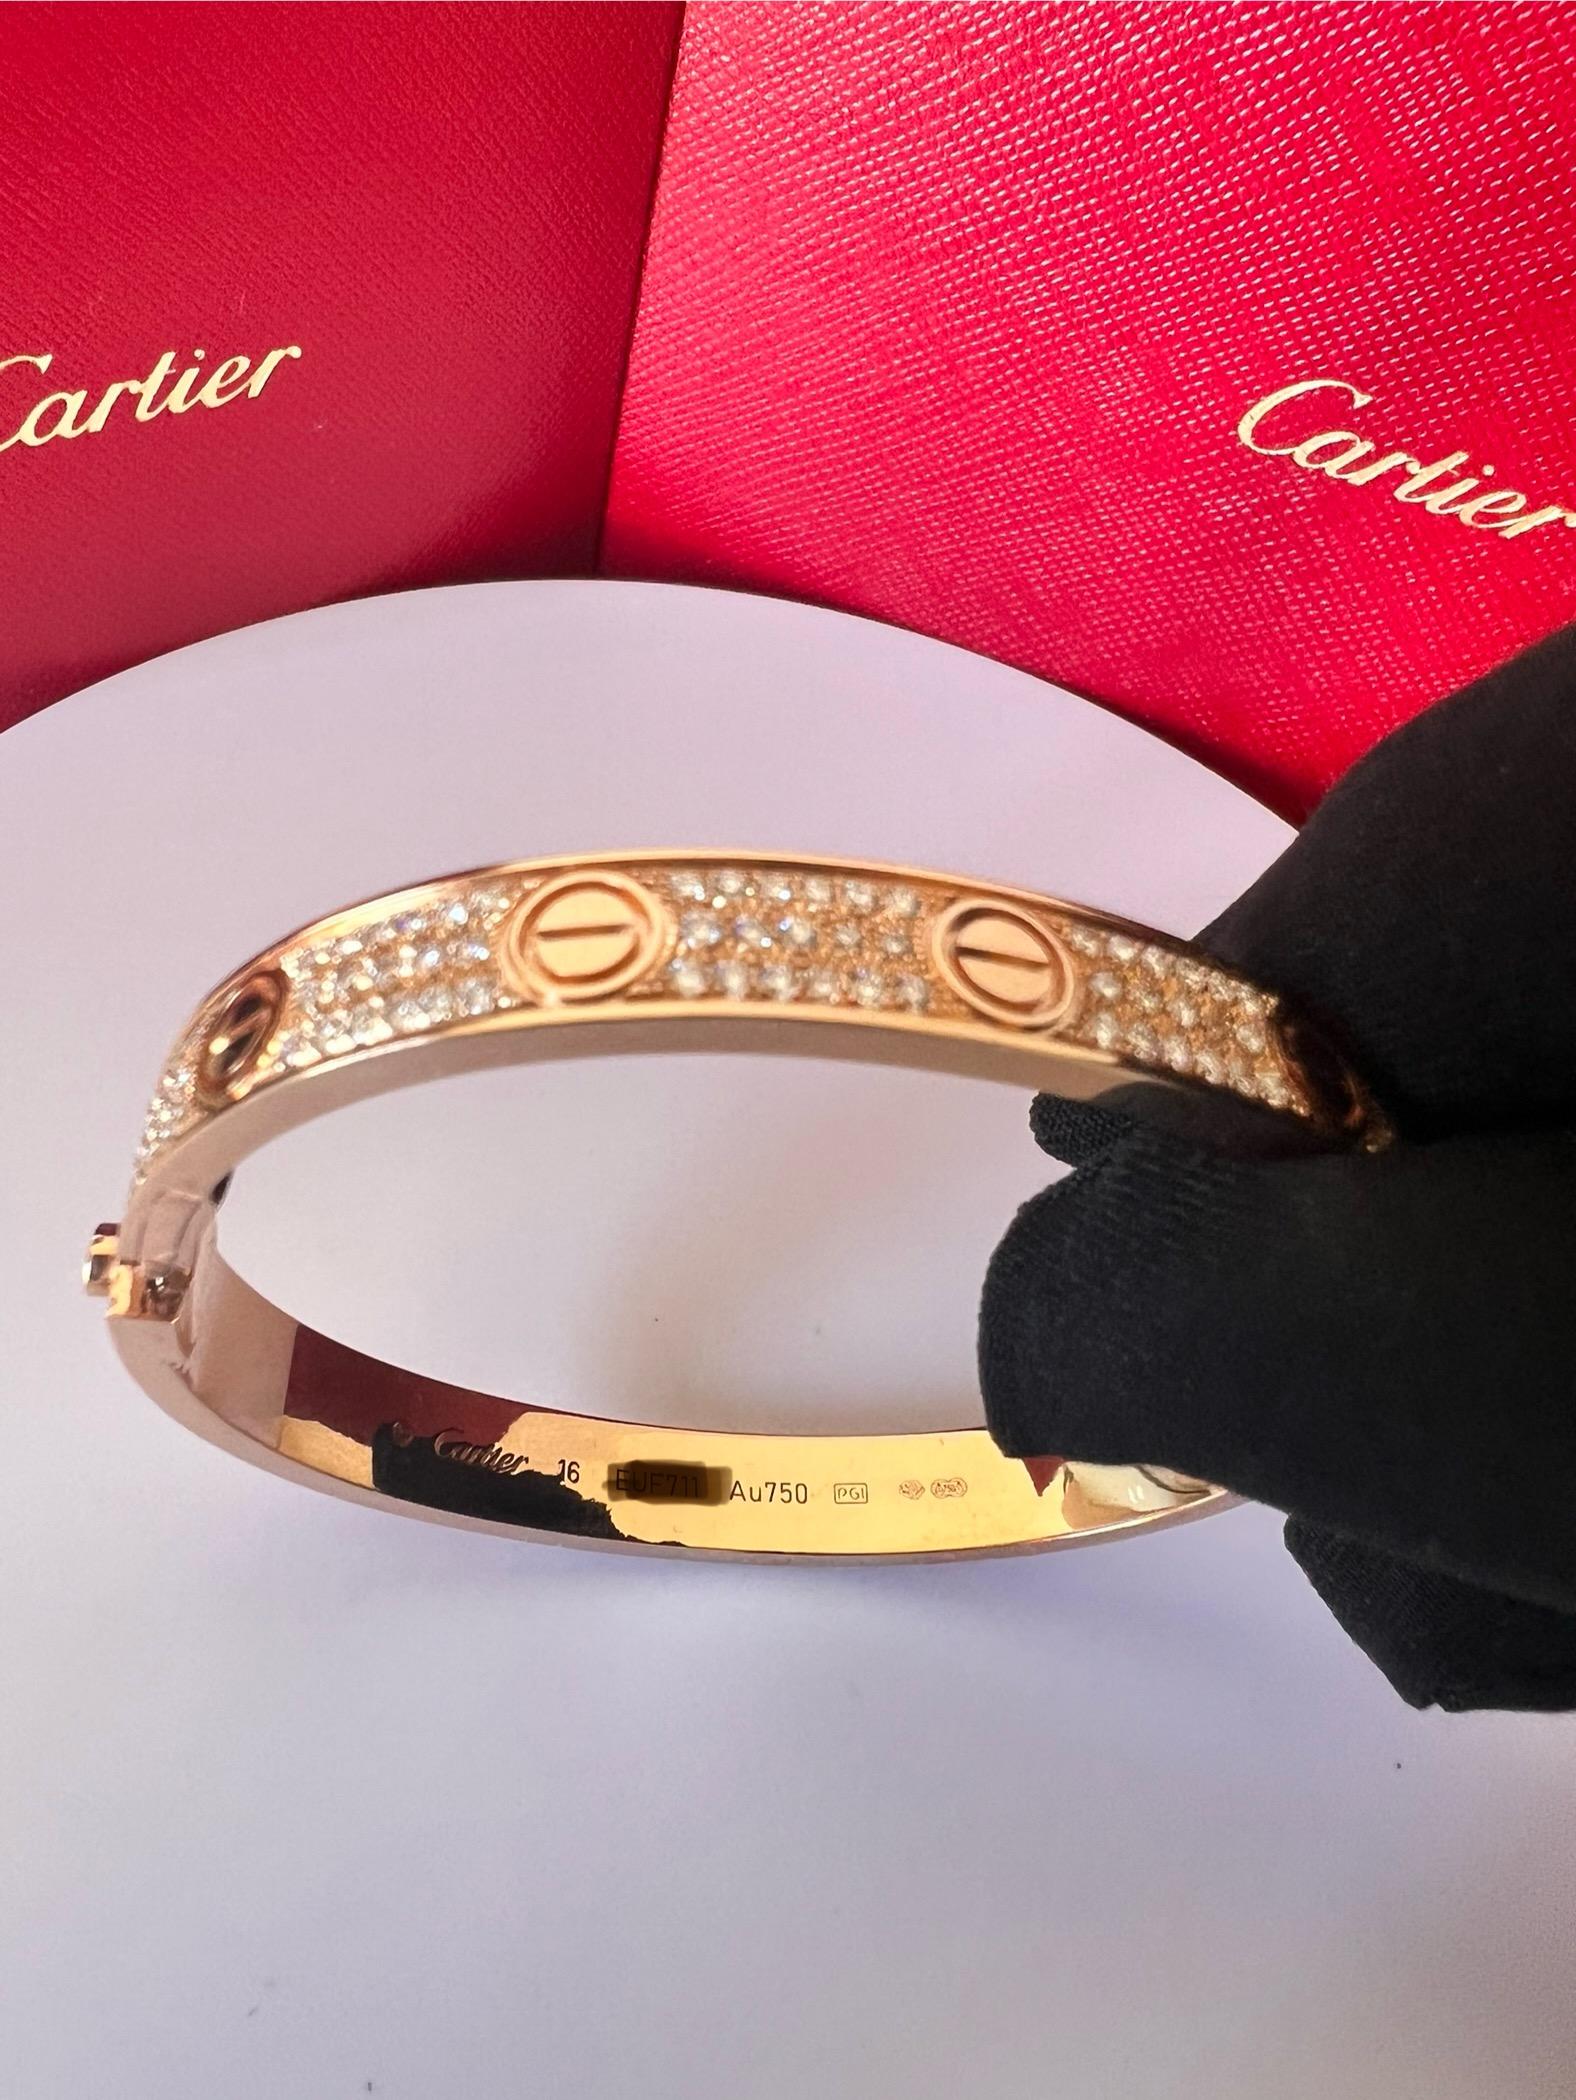 CARTIER LOVE BRACELET
Cartier 'Love' bangle bracelet crafted in 18k yellow gold with gold screw tops and pave set round brilliant cut diamonds (D-F in color, VVS clarity)
Signed Cartier,  750, with serial number and hallmarks 
The bracelet is